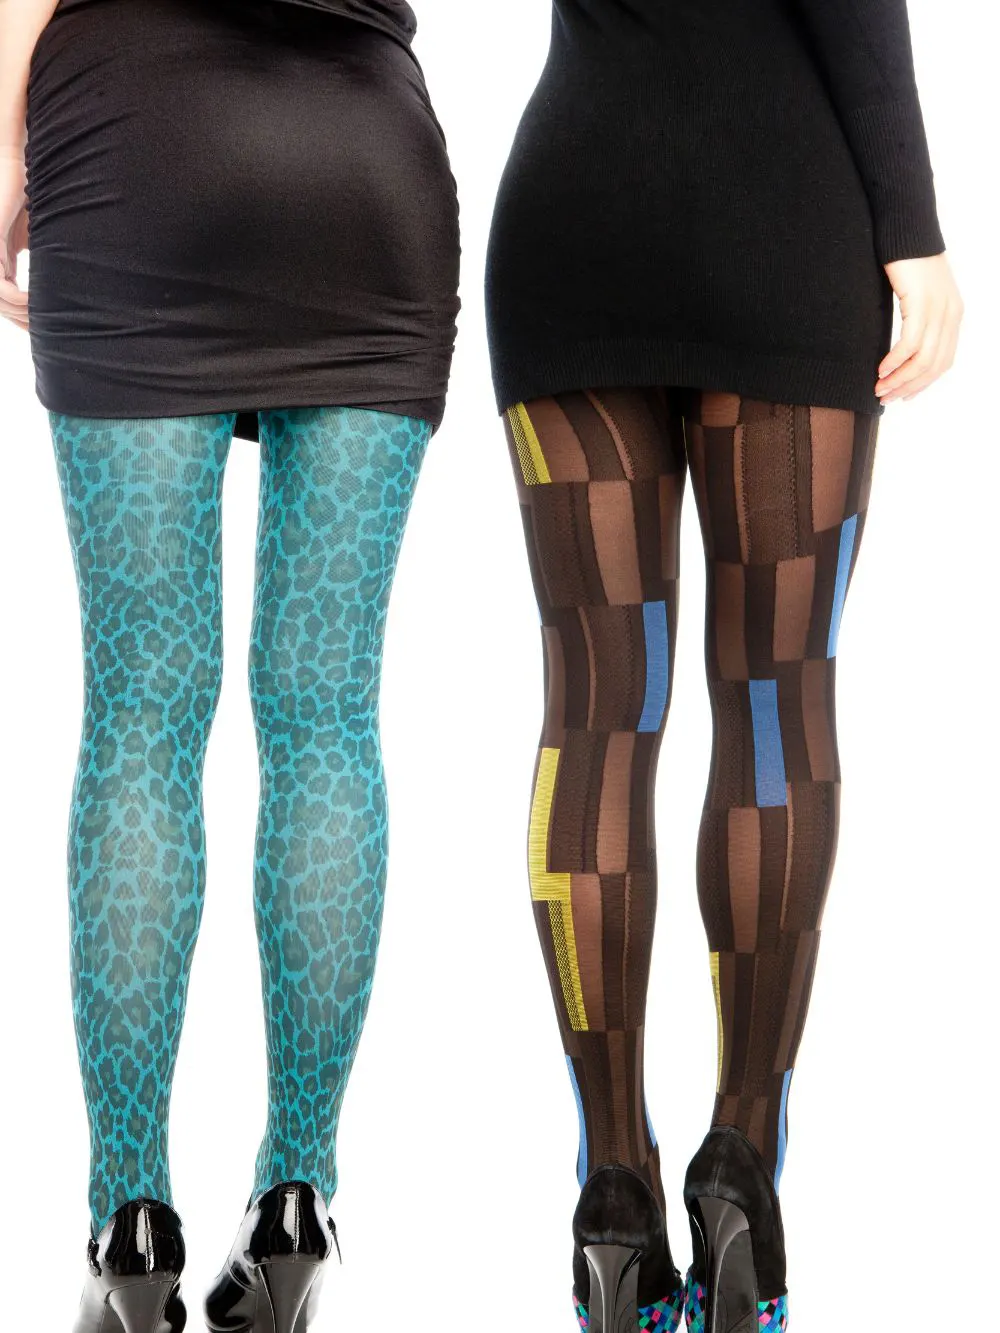 Two girls wear tights